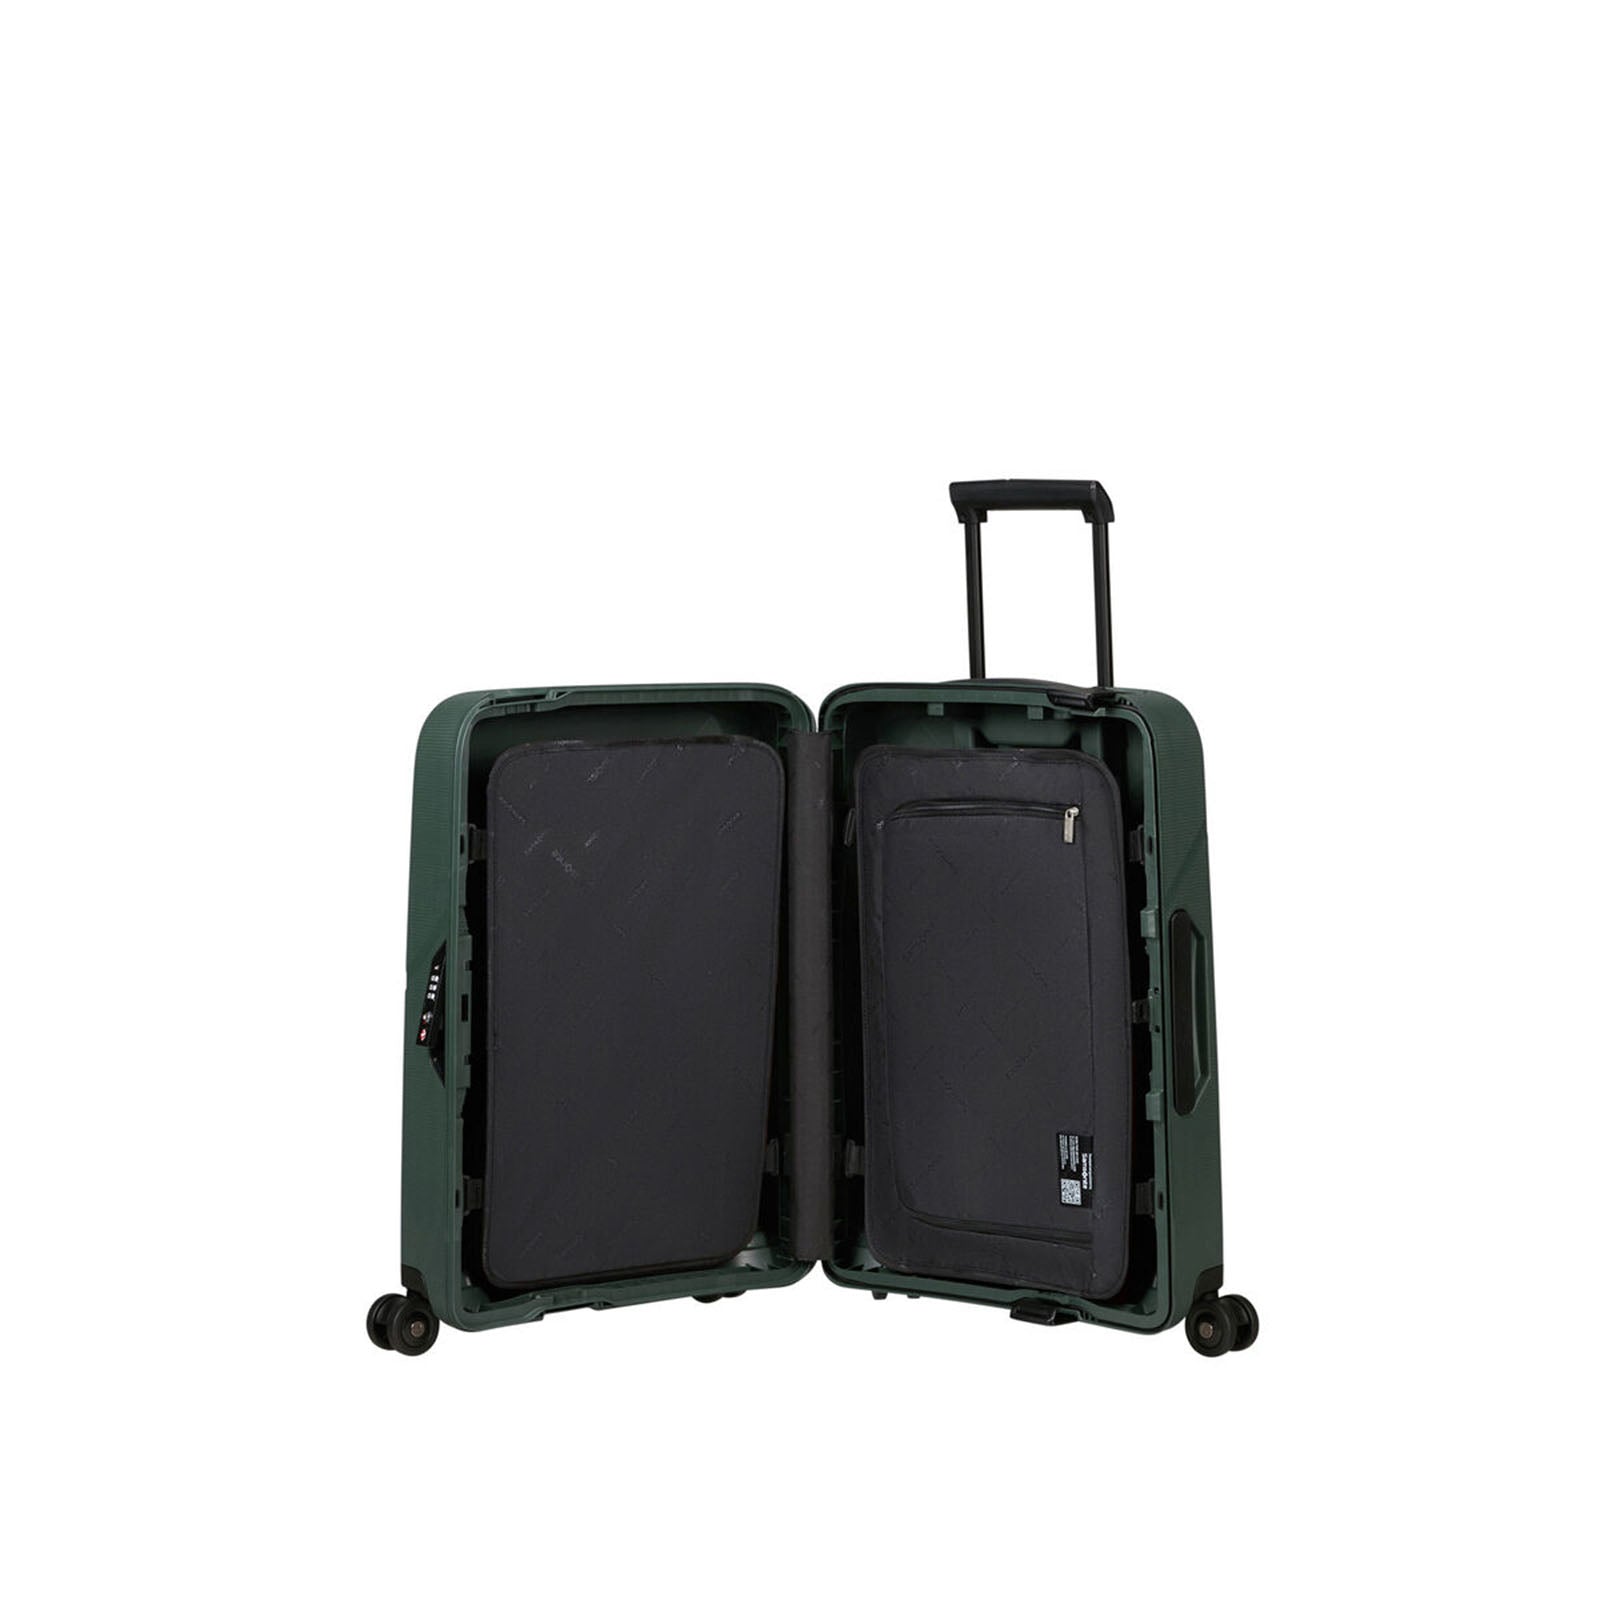 Samsonite-Magnum-Eco-55cm-Carry-On-Suitcase-Forest-Green-Open